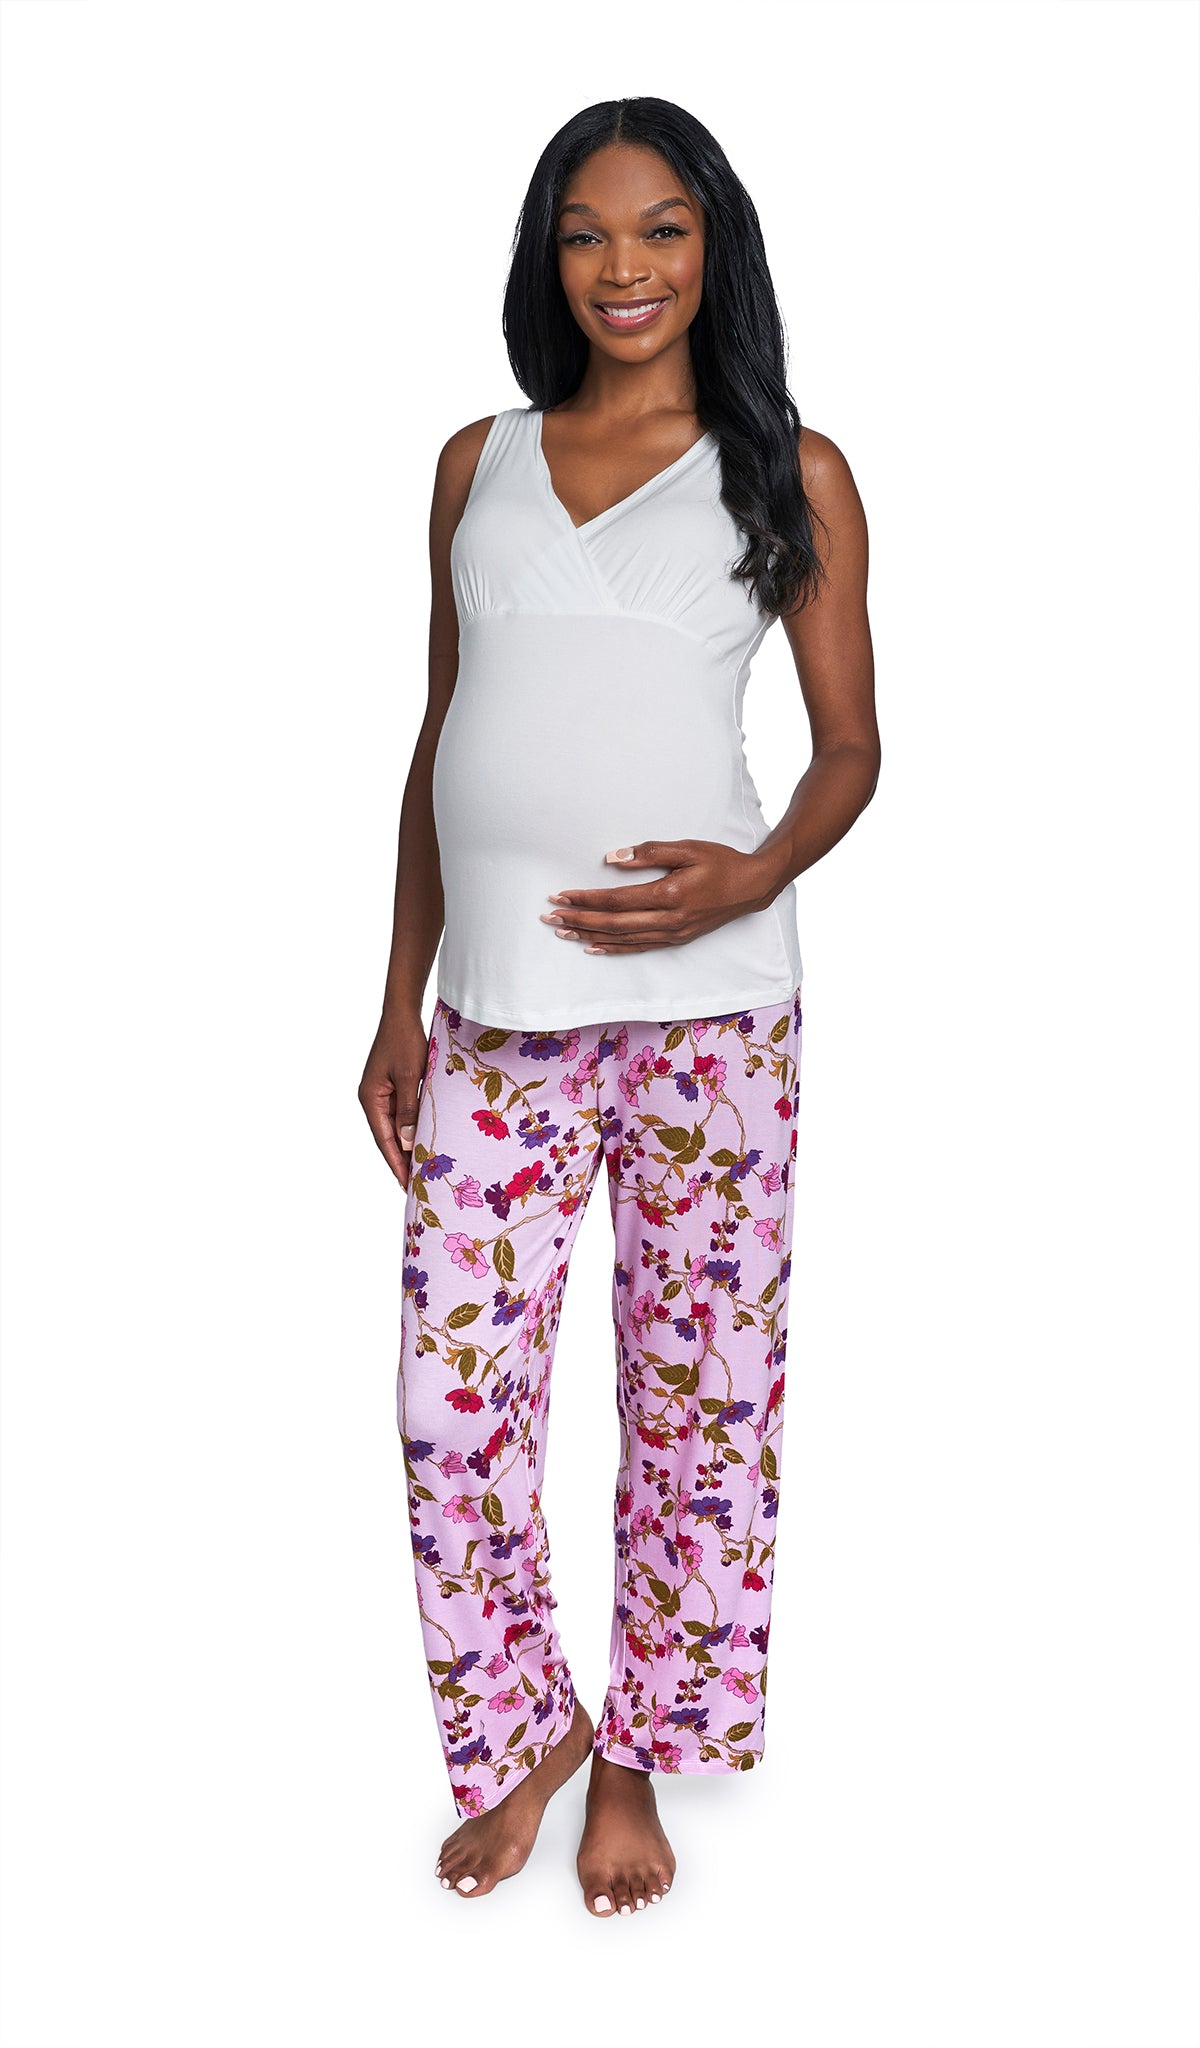 Lavender Rose Analise 3-Piece Set, pregnant woman wearing criss-cross bust tank top and pant.